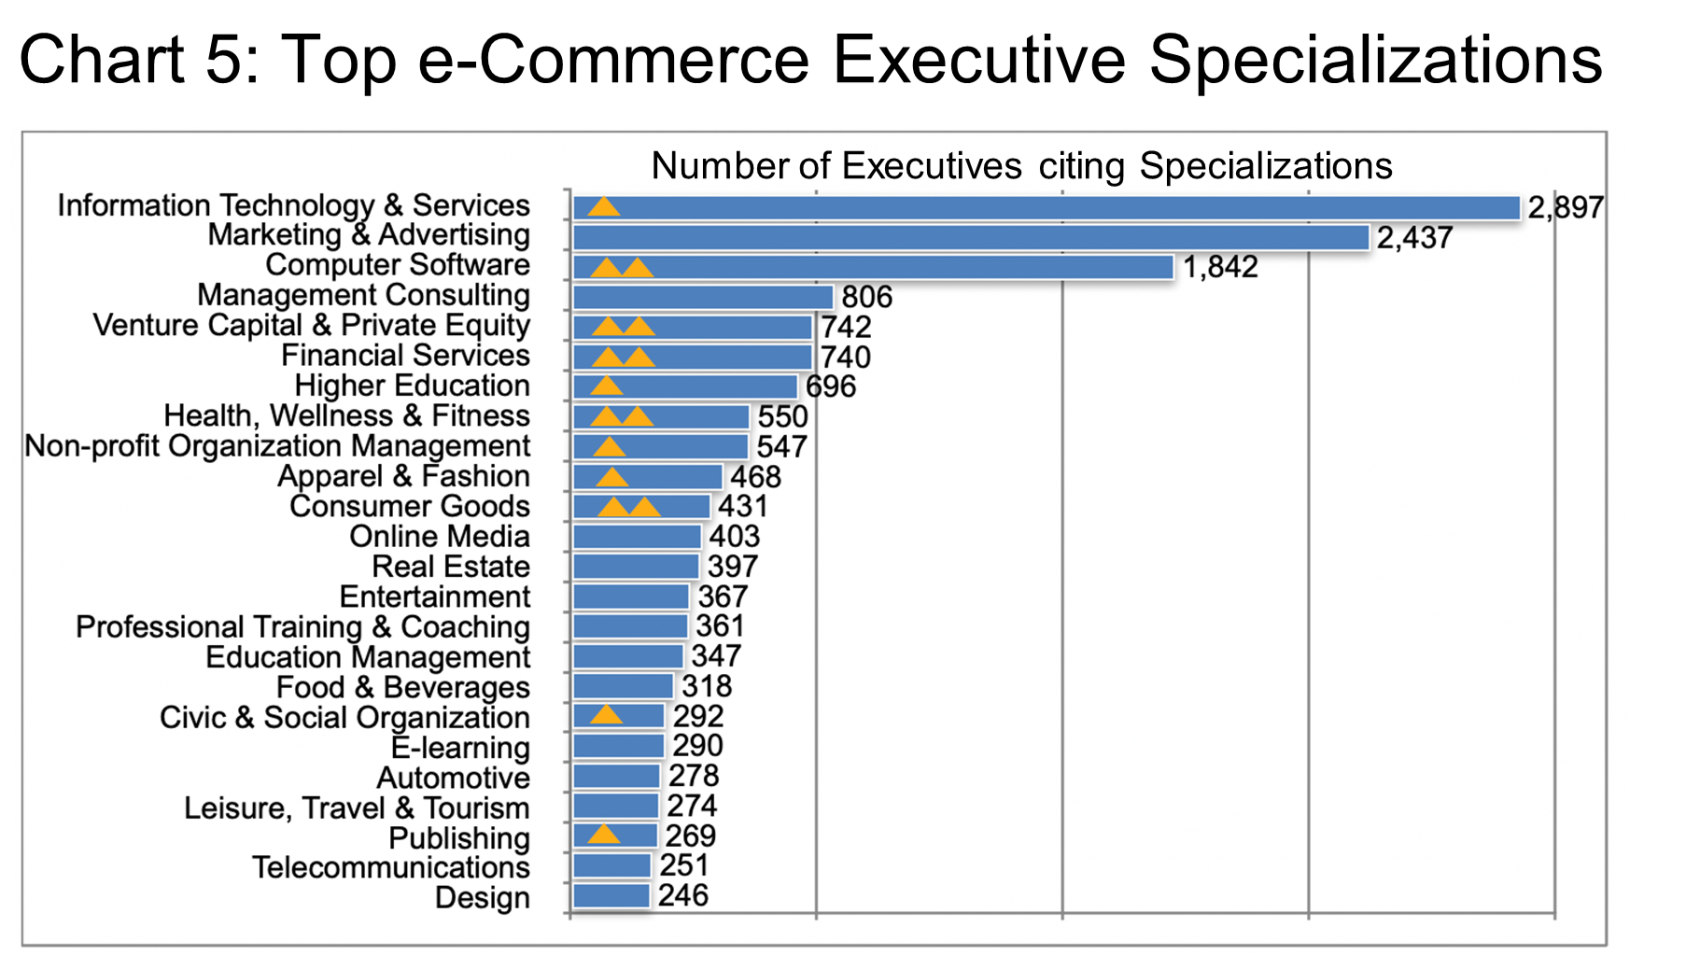 Top e-Commerce Executive Specializations Chart 5.